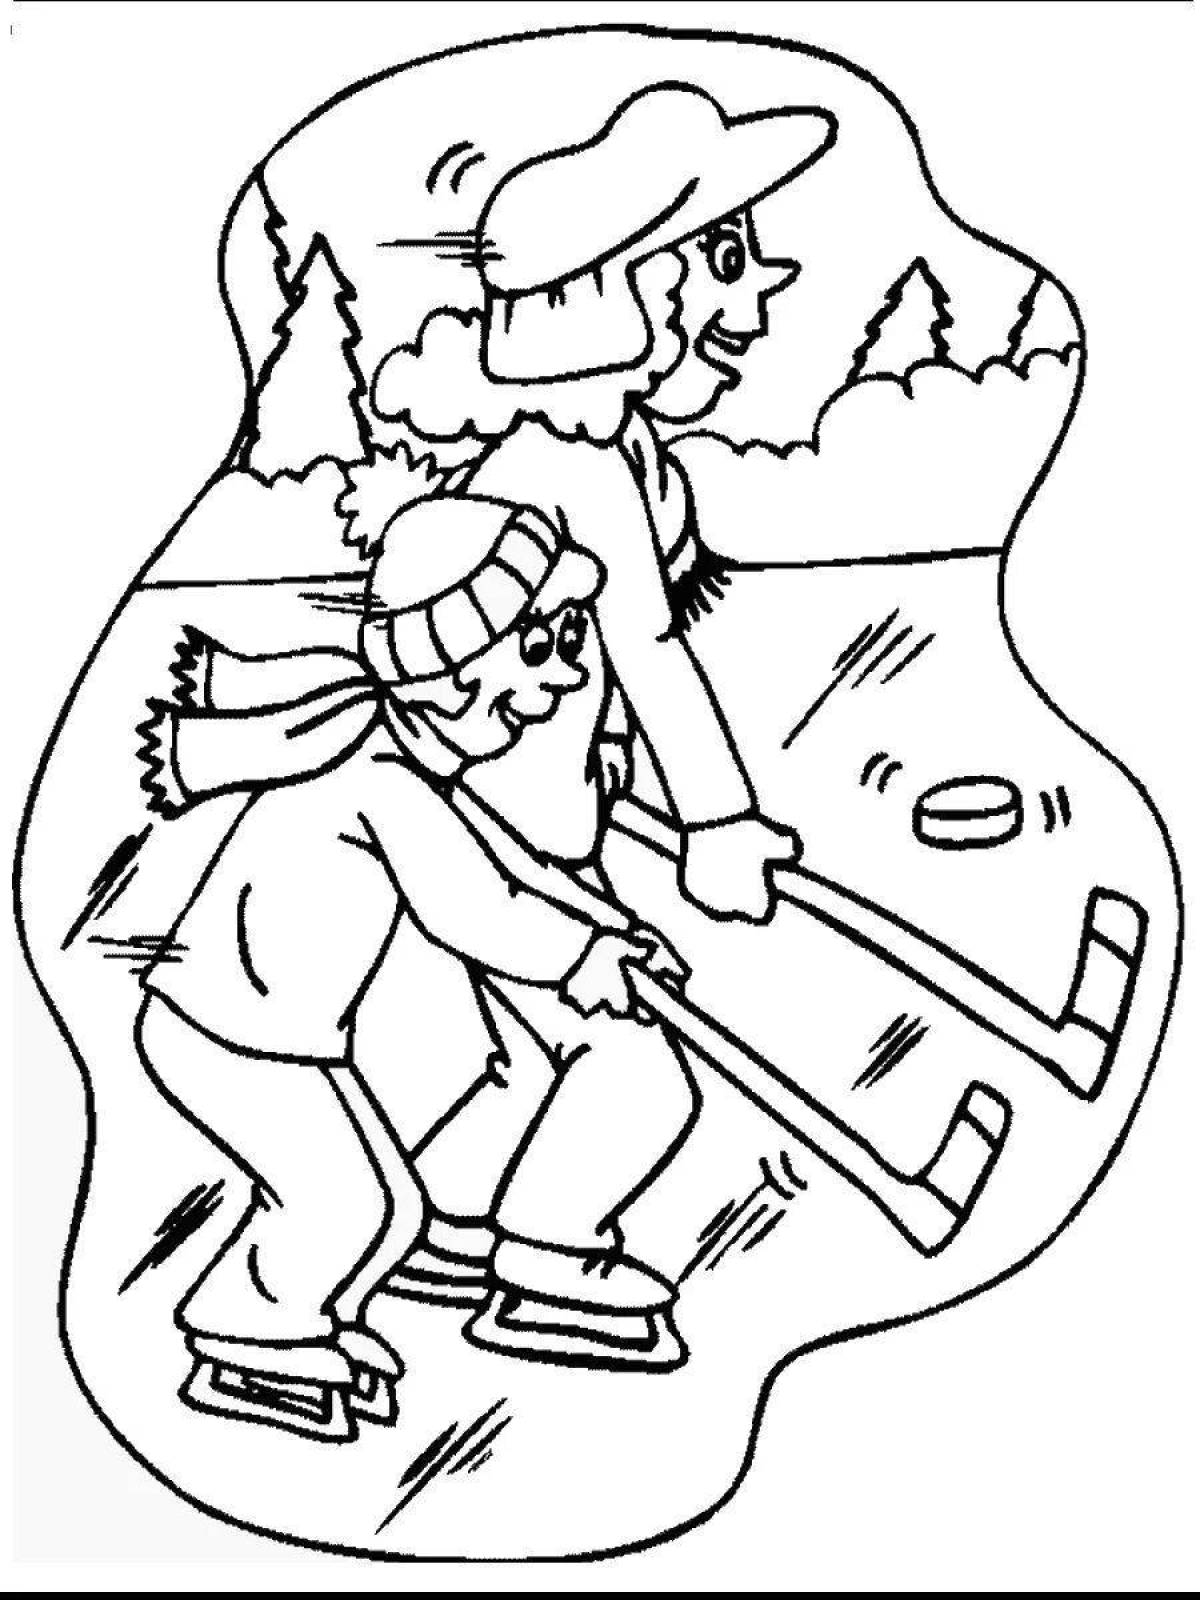 Color-burst winter safety coloring page